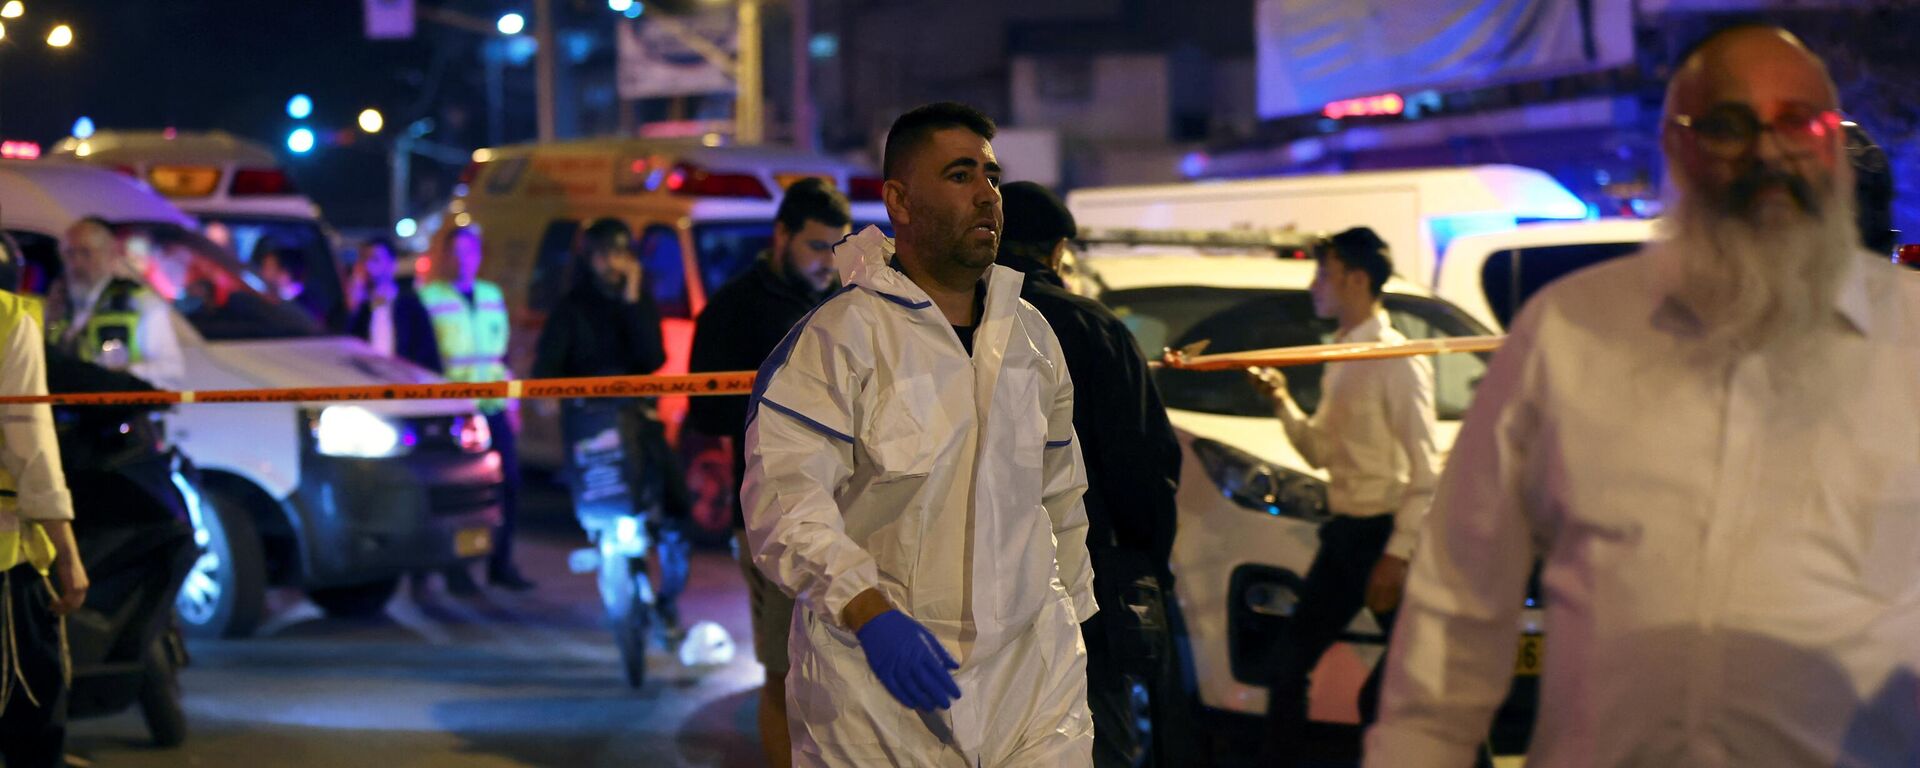 Israeli police forensics experts work at the scene of an attack in which people were killed by a gunman on a main street in Bnei Brak, near Tel Aviv, Israel, March 29, 2022. - Sputnik International, 1920, 29.03.2022